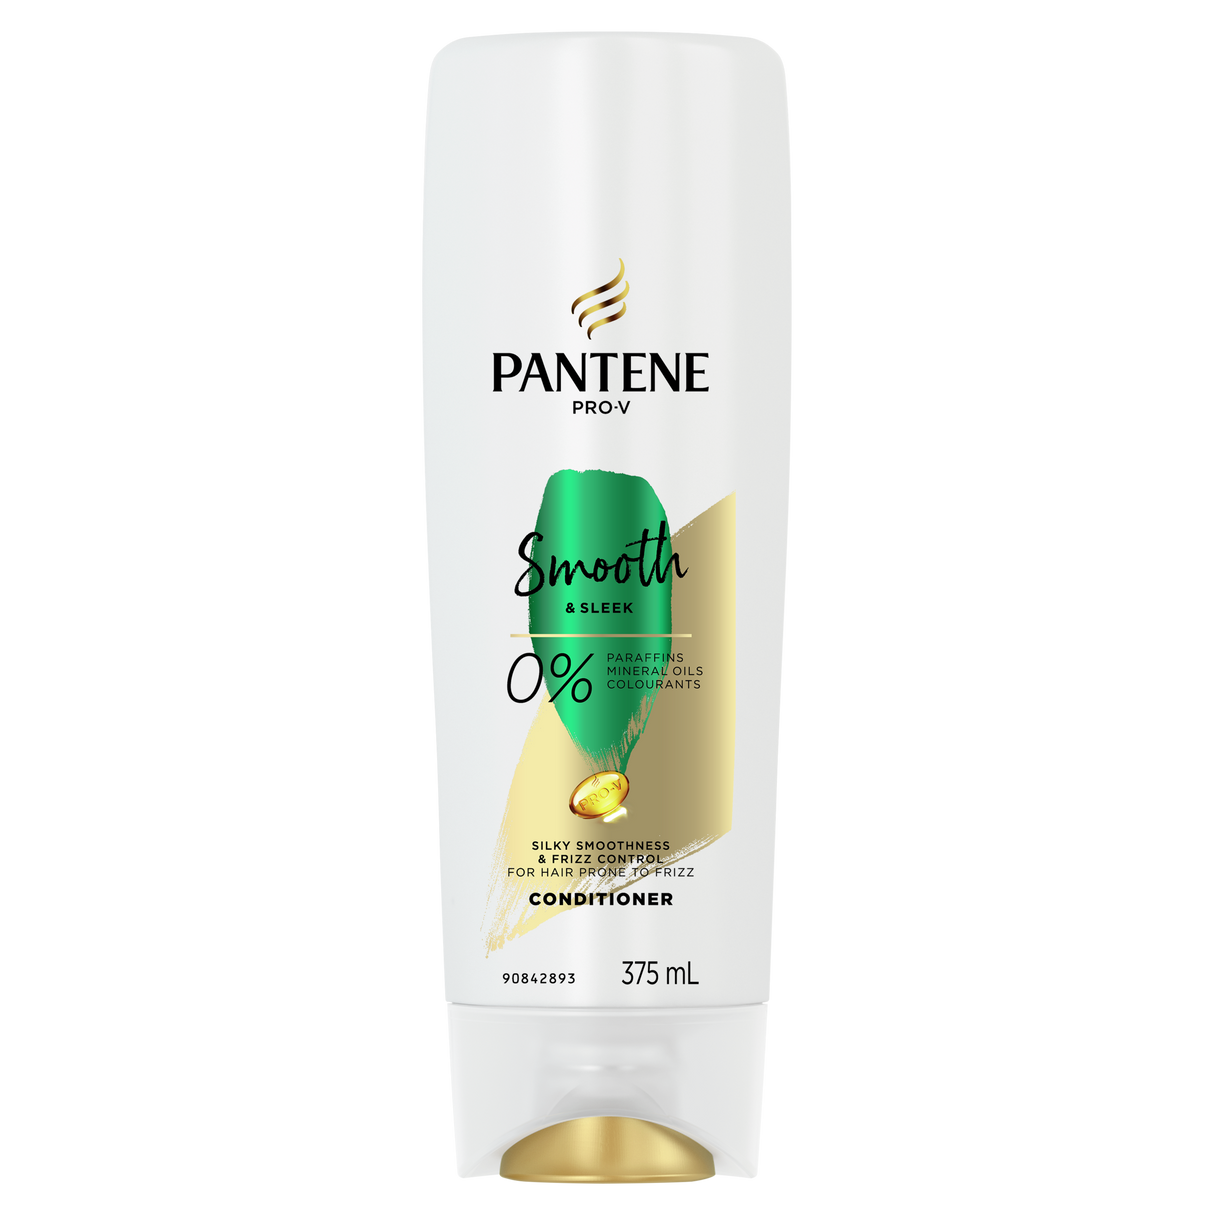 Pantene Pro-V Smooth & Sleek Conditioner for Frizzy Hair 375ml